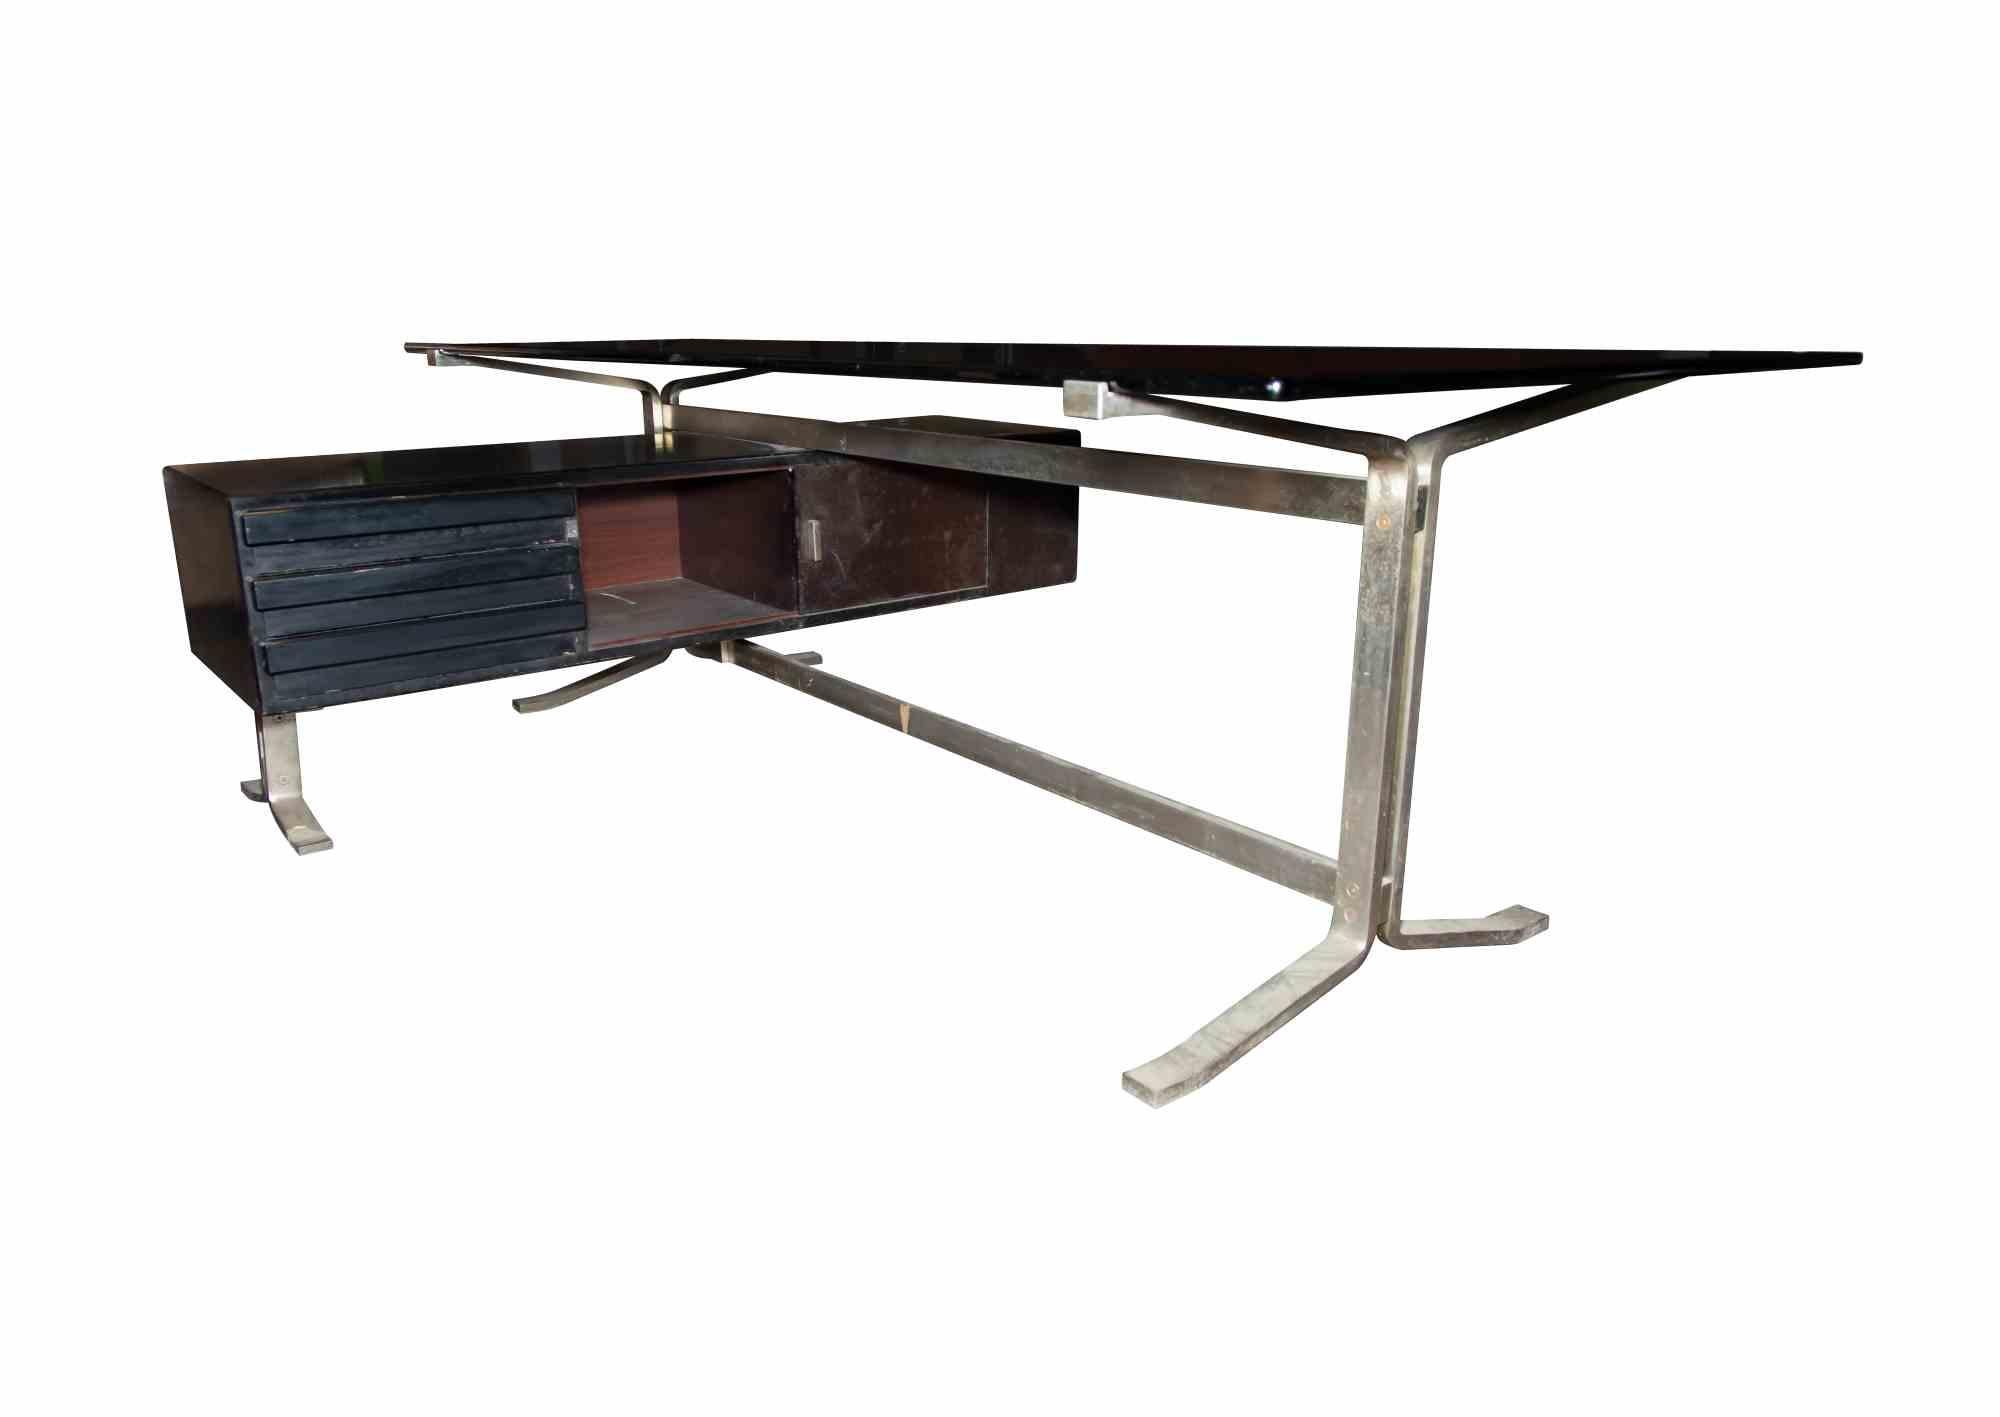 Italian Vintage Angle Desk by Gianni Moscatelli for Formanova Italy, 1965 ca. For Sale